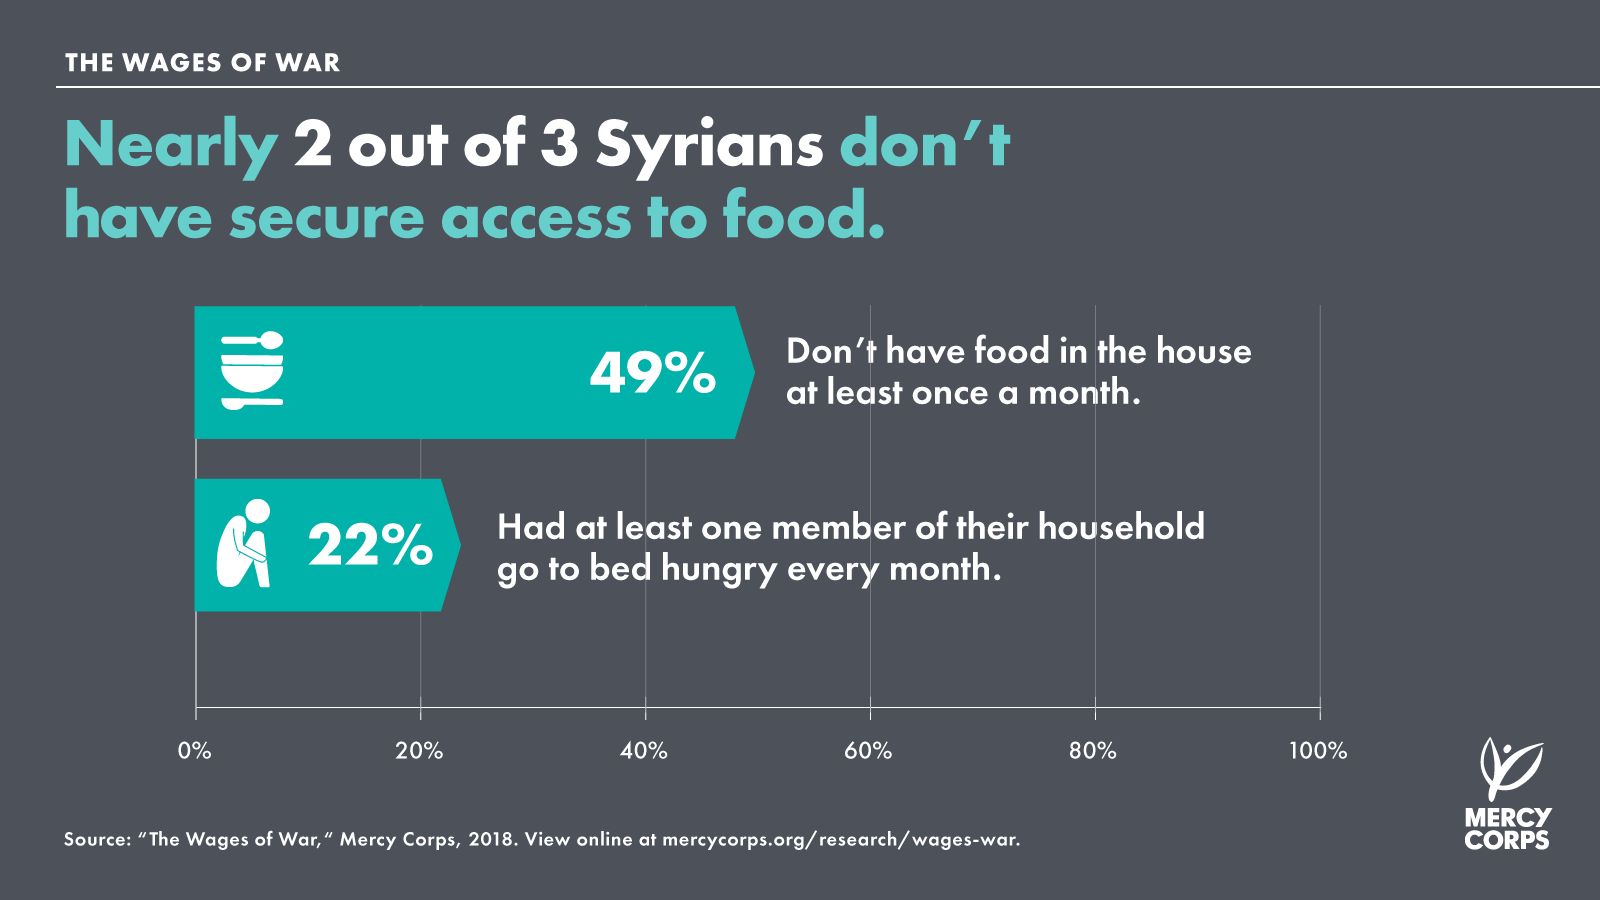 Nearly 2 out of 3 Syrians don't have secure access to food.